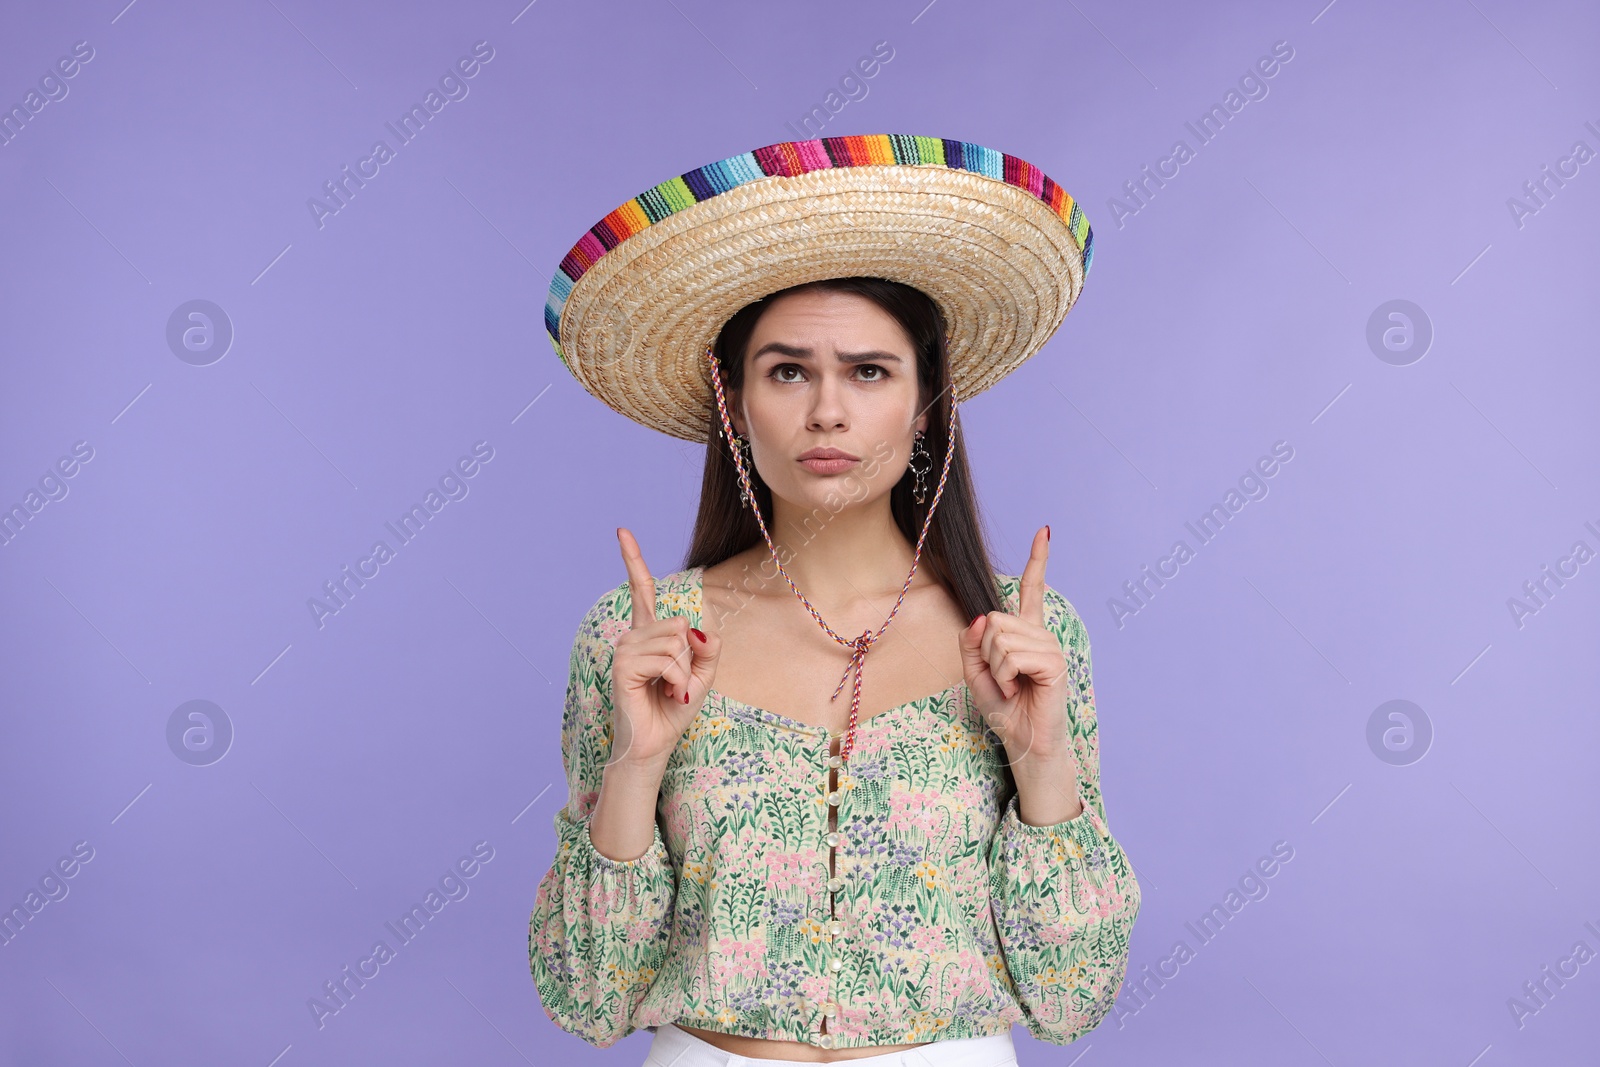 Photo of Young woman in Mexican sombrero hat pointing at something on violet background